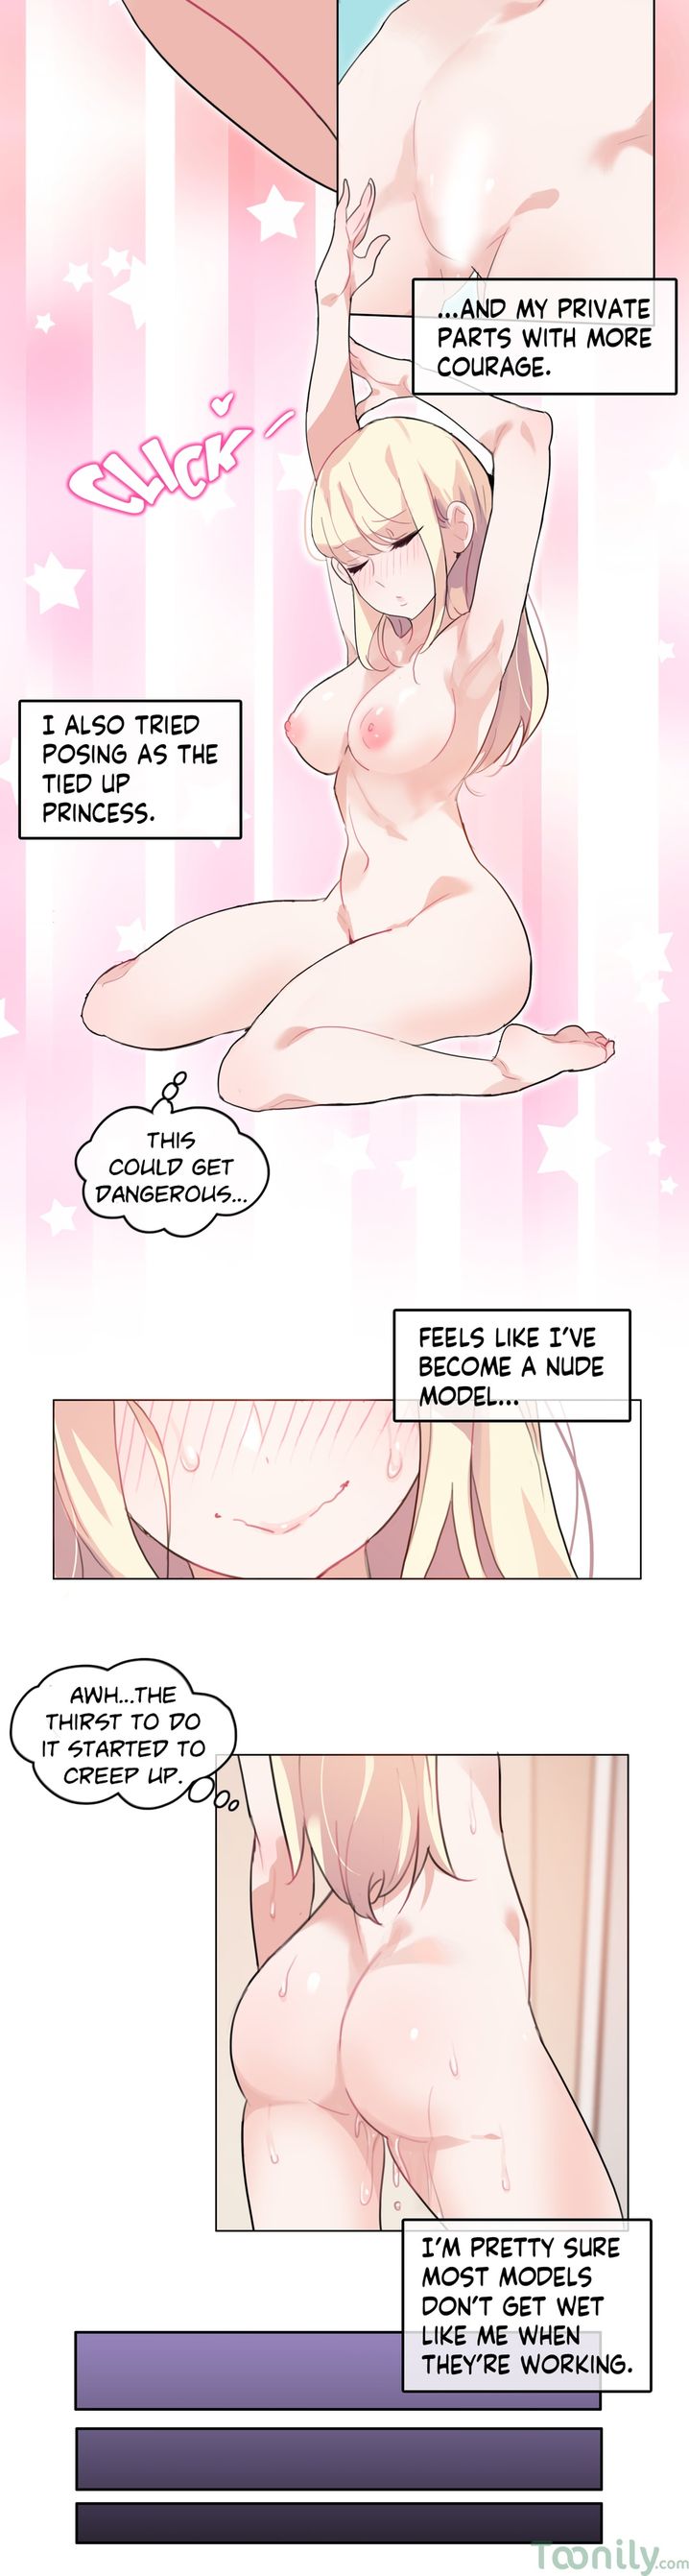 A Pervert’s Daily Life - Chapter 7 Page 5